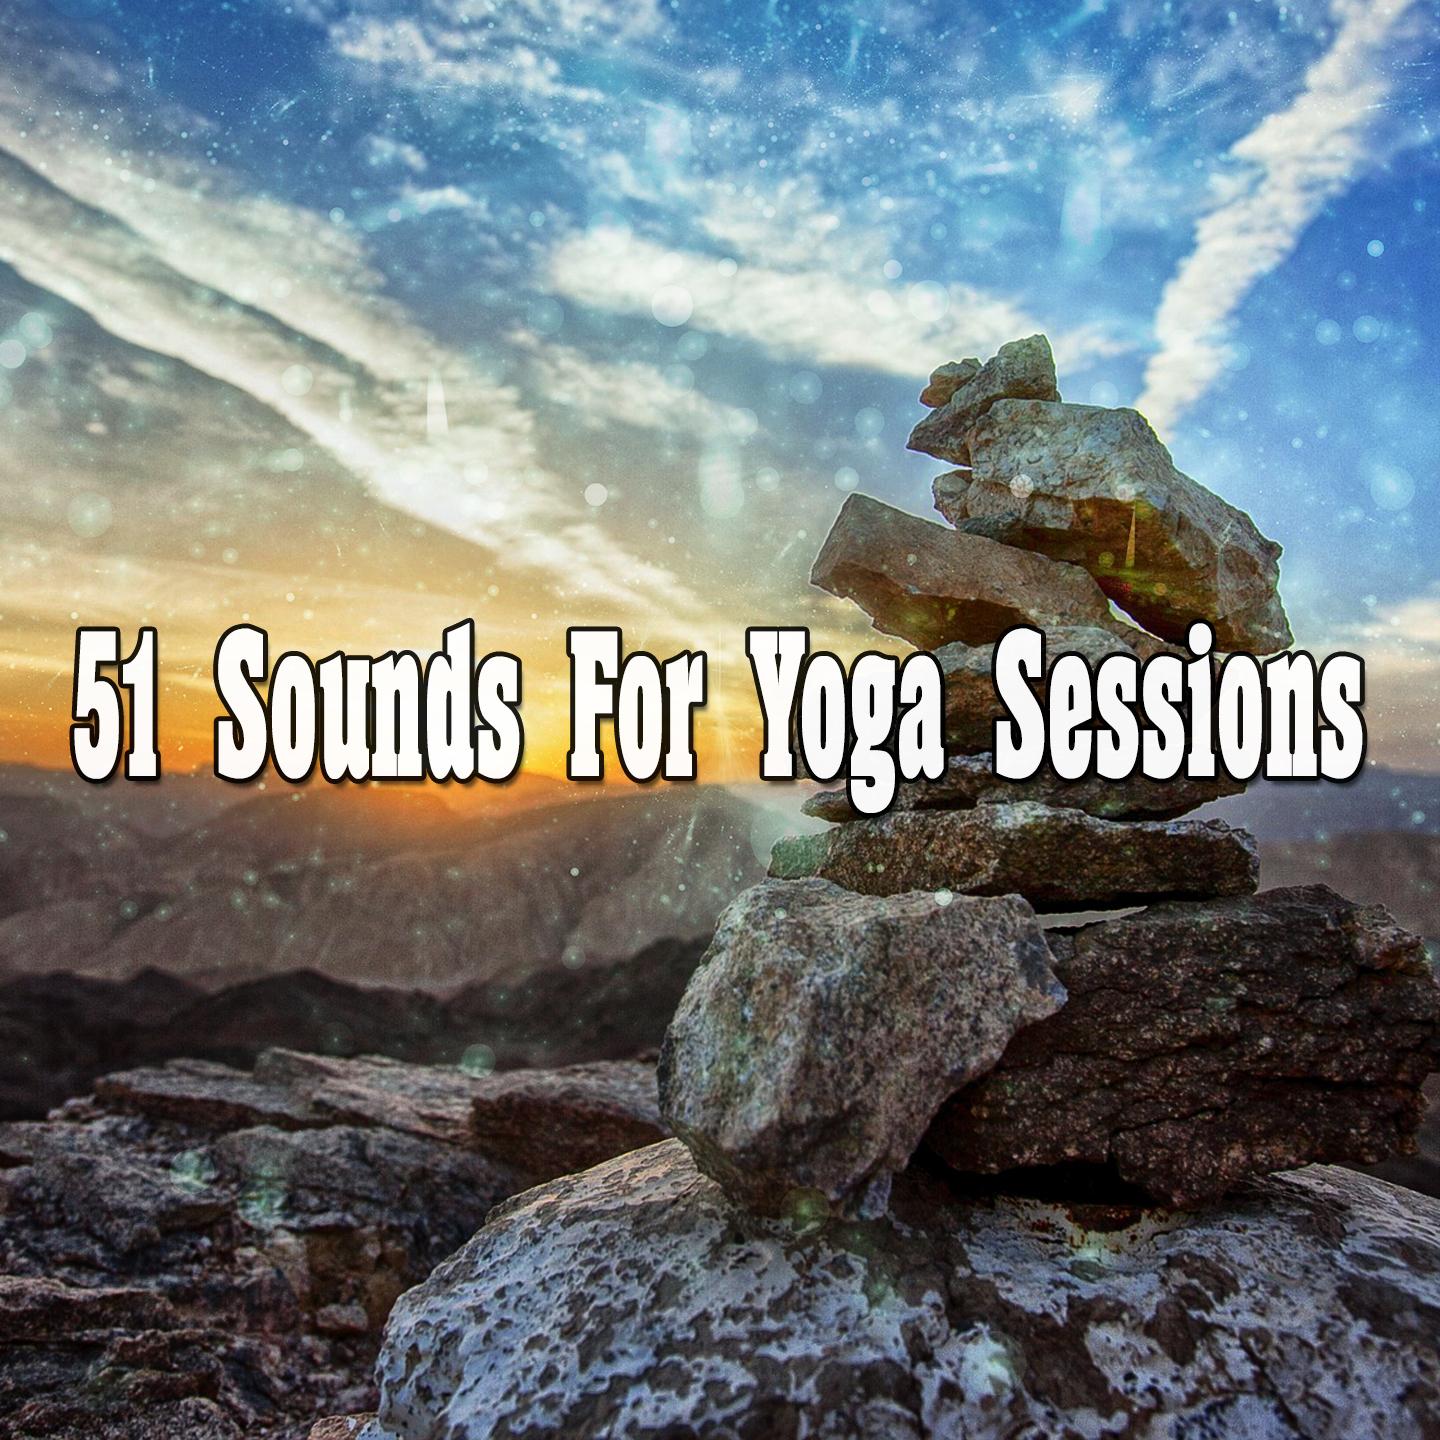 51 Sounds for Yoga Sessions